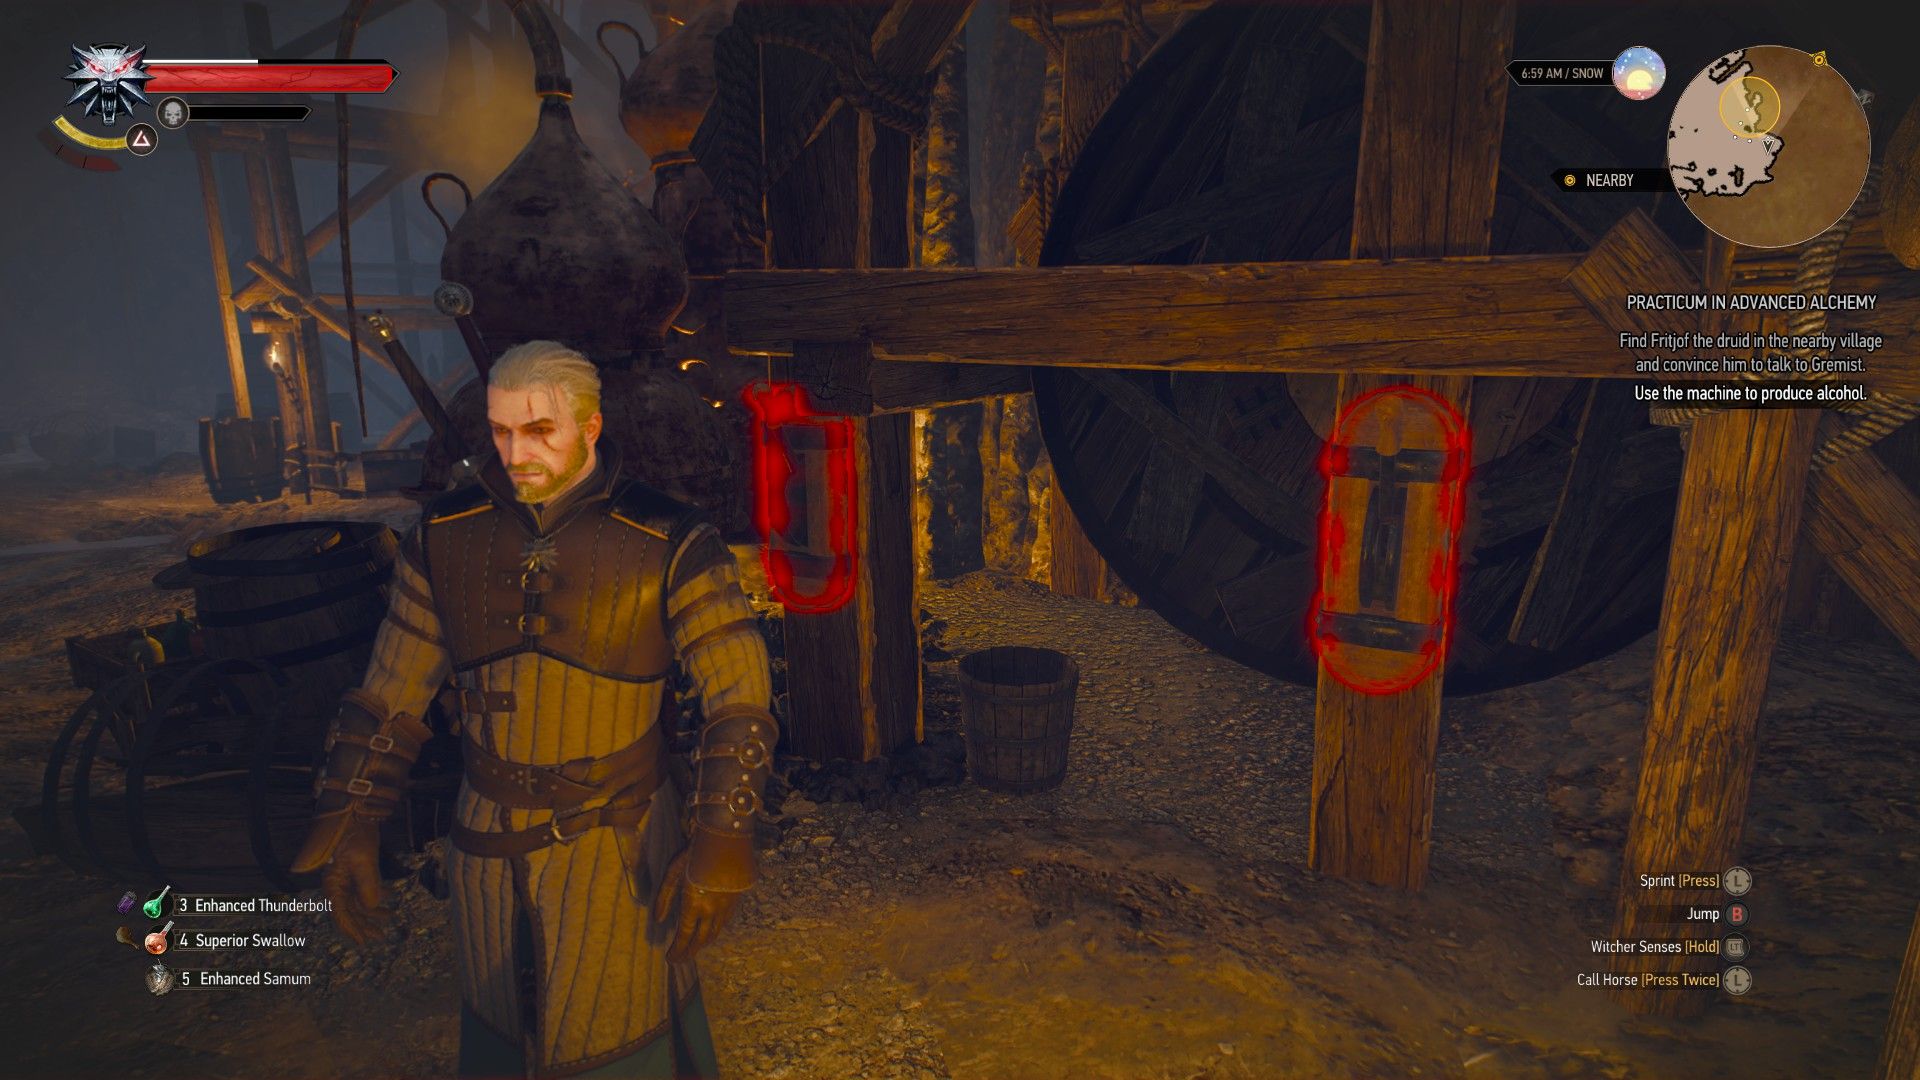 A screenshot of the pair of levers needed to produce alcohol in The Witcher 3.